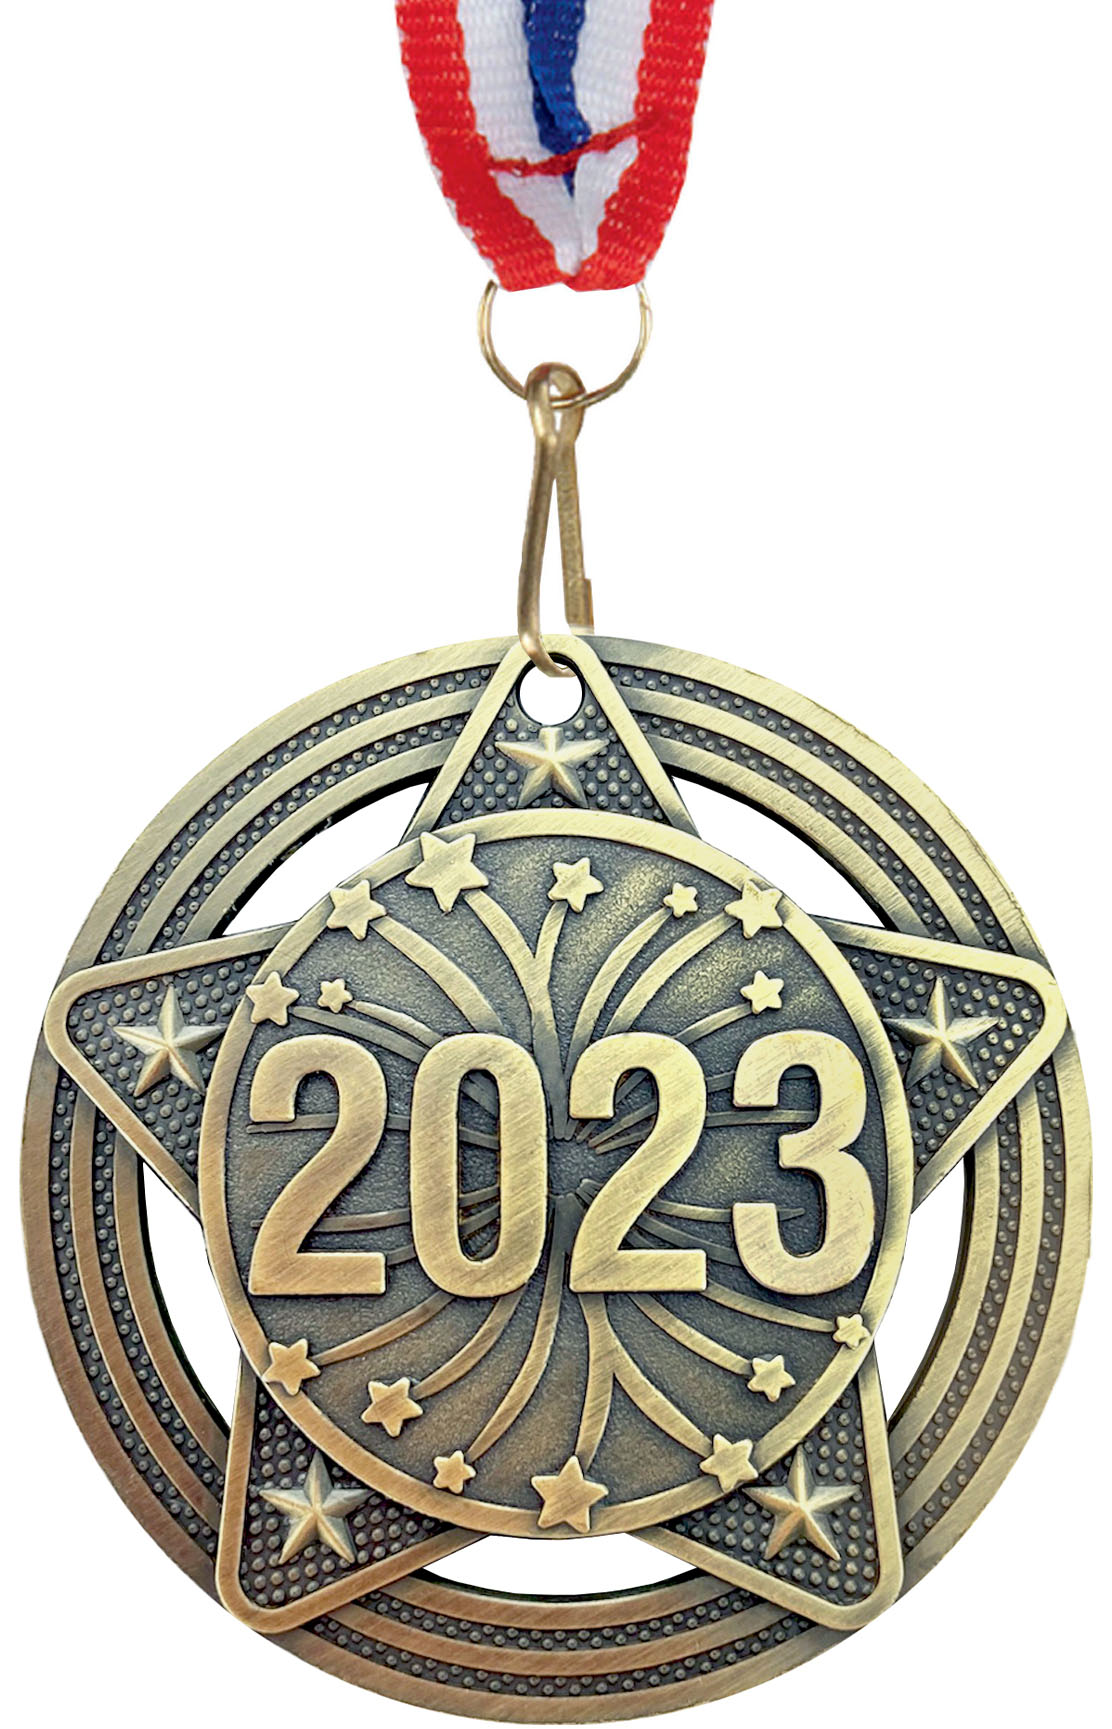 2023 Medal by Infinity Stars Antique Gold with Medal Ribbon 50mm (2